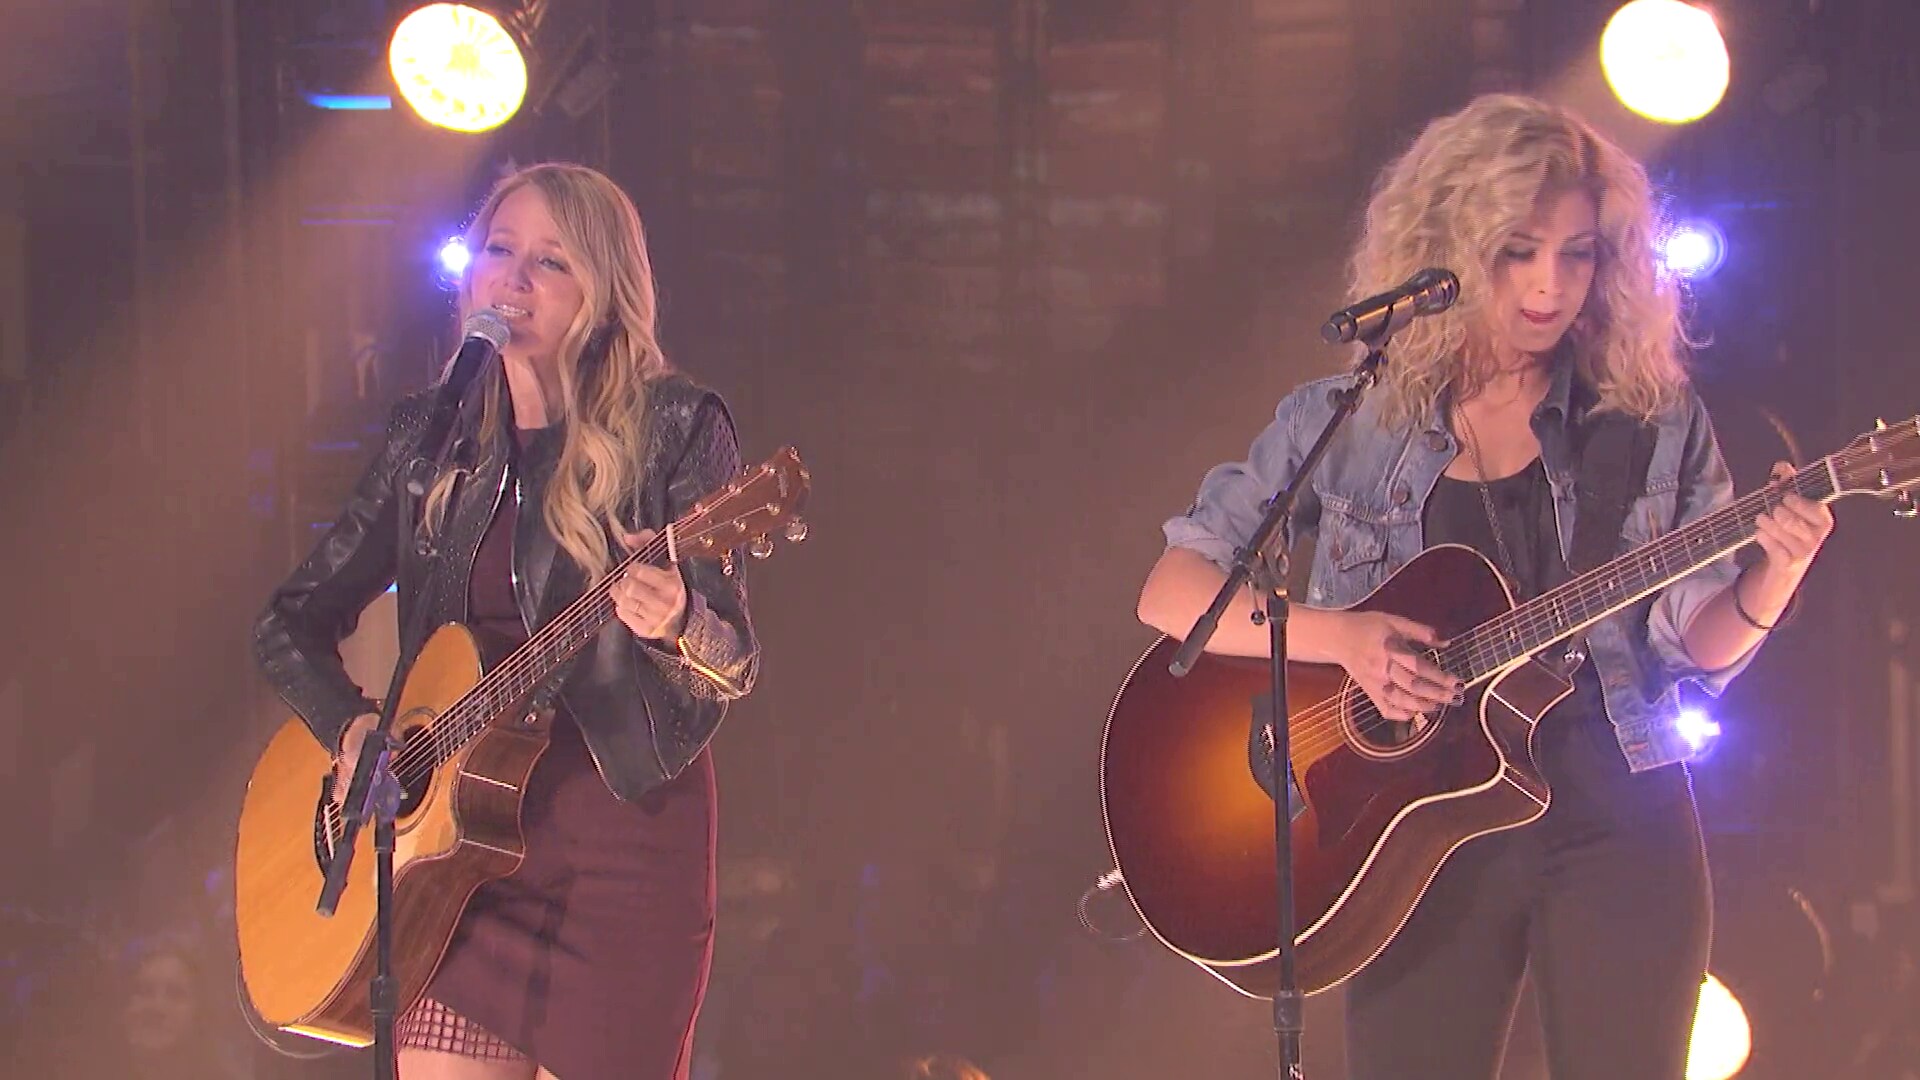 JEWEL & TORI KELLY - "You Were Meant For Me"